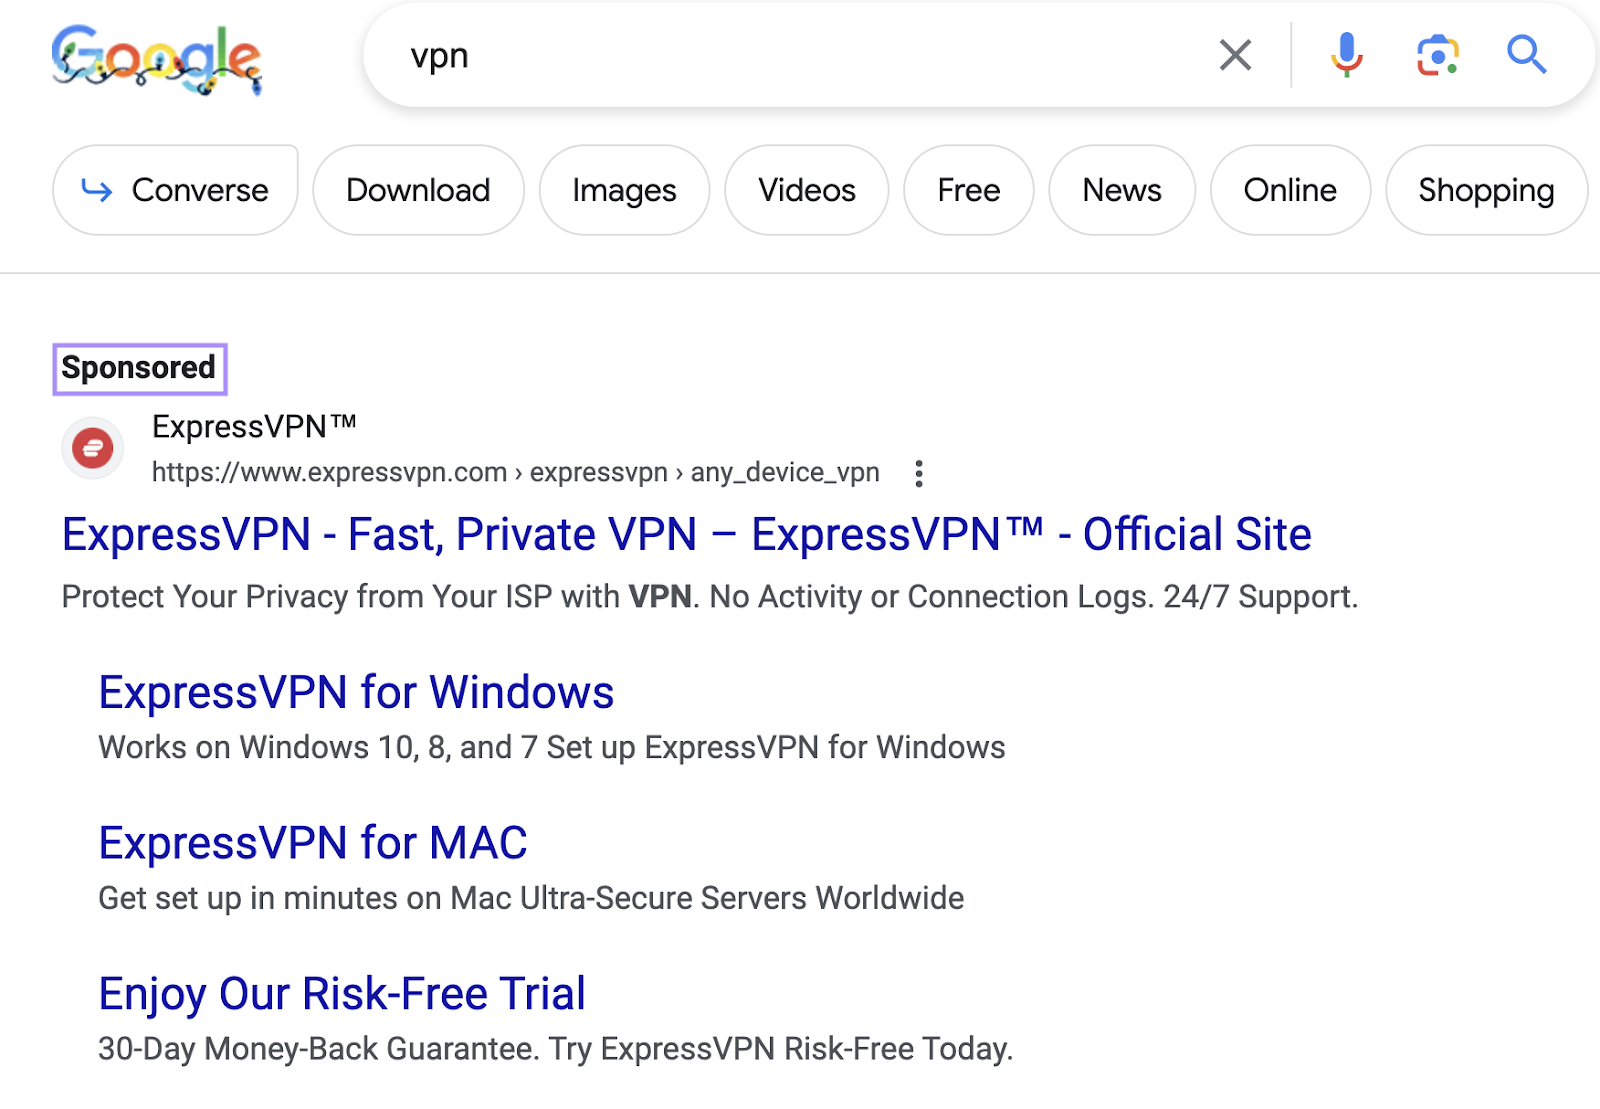 ExpressVPN's PPC advertisement  connected  Google for the hunt  word  "vpn"